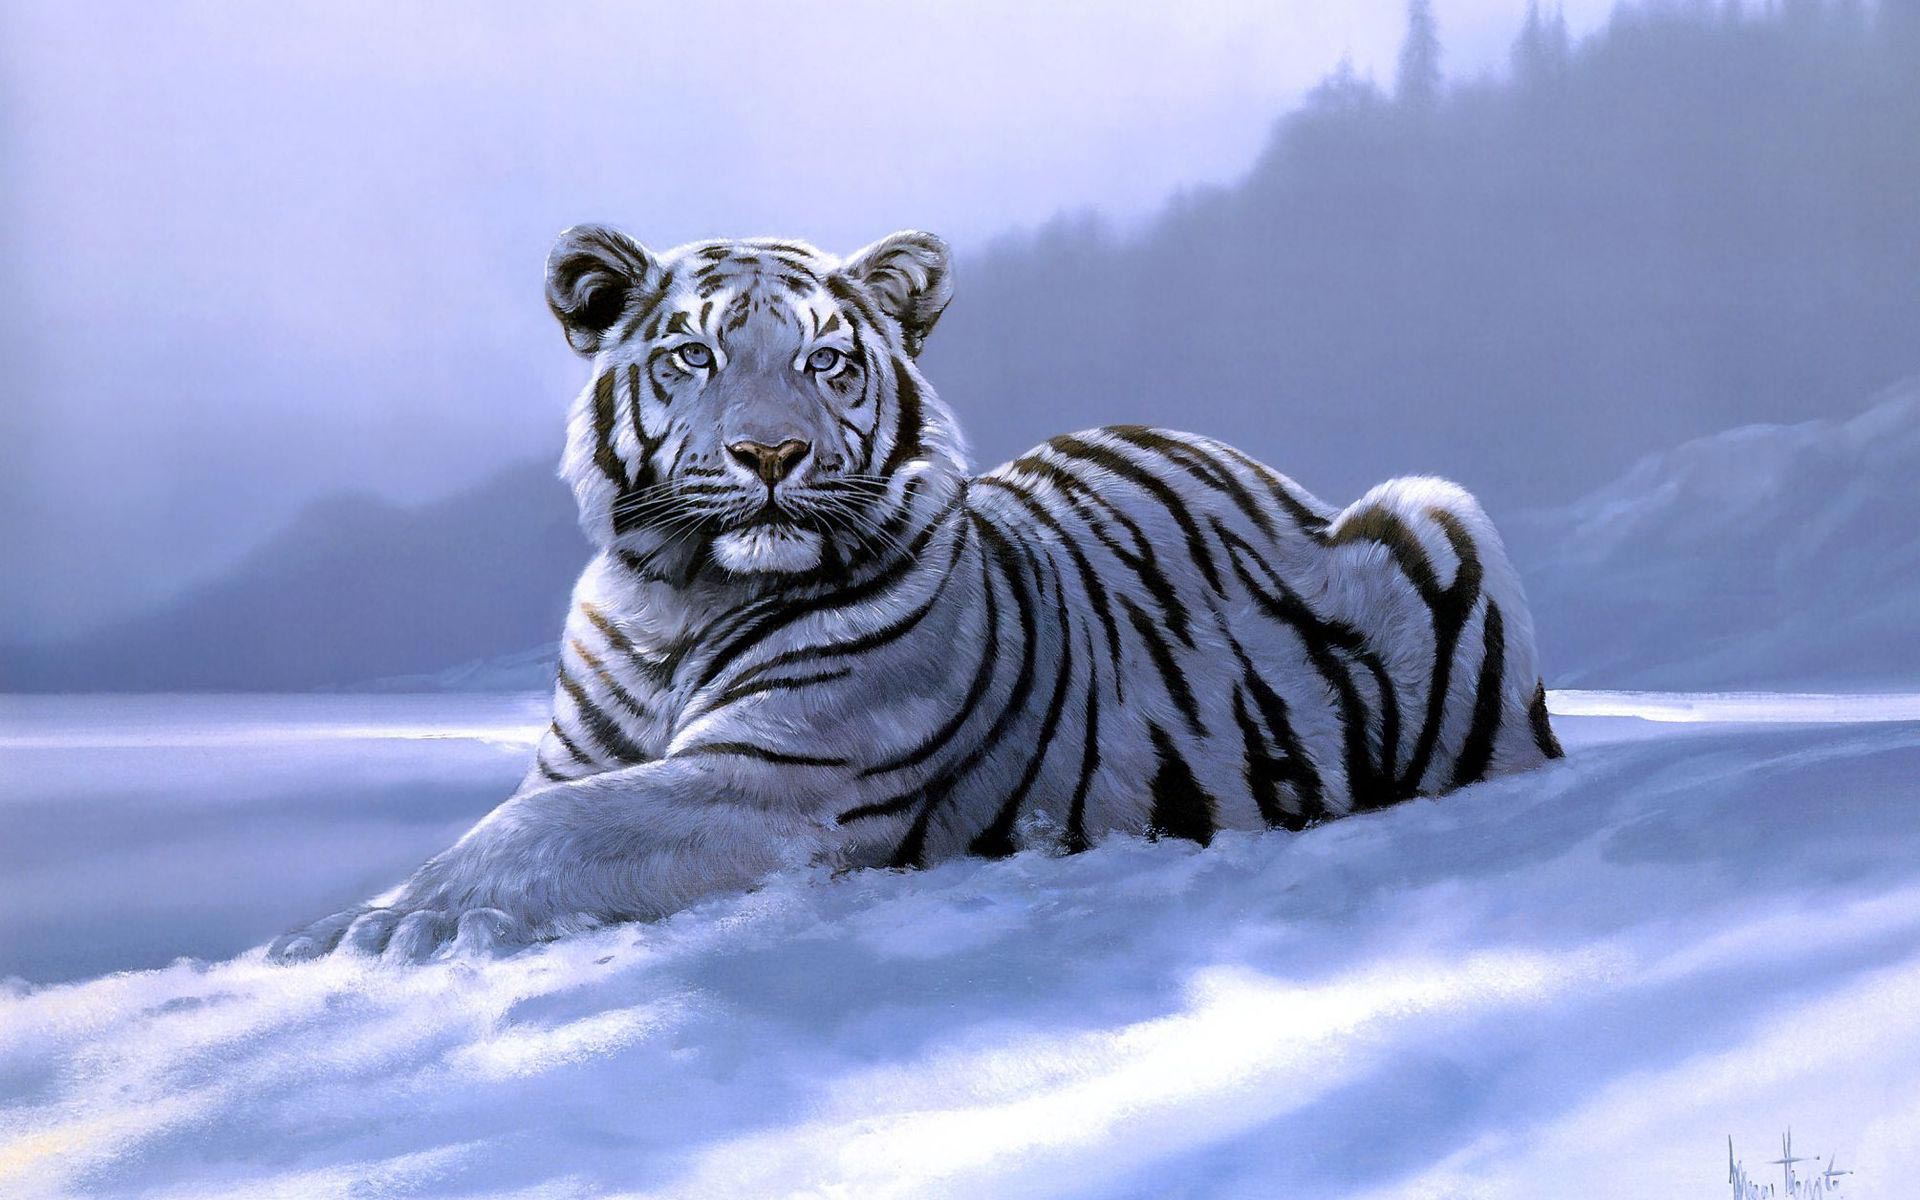  Wallpaper Tiger 1067 high quality Backgrounds for mobile iphone